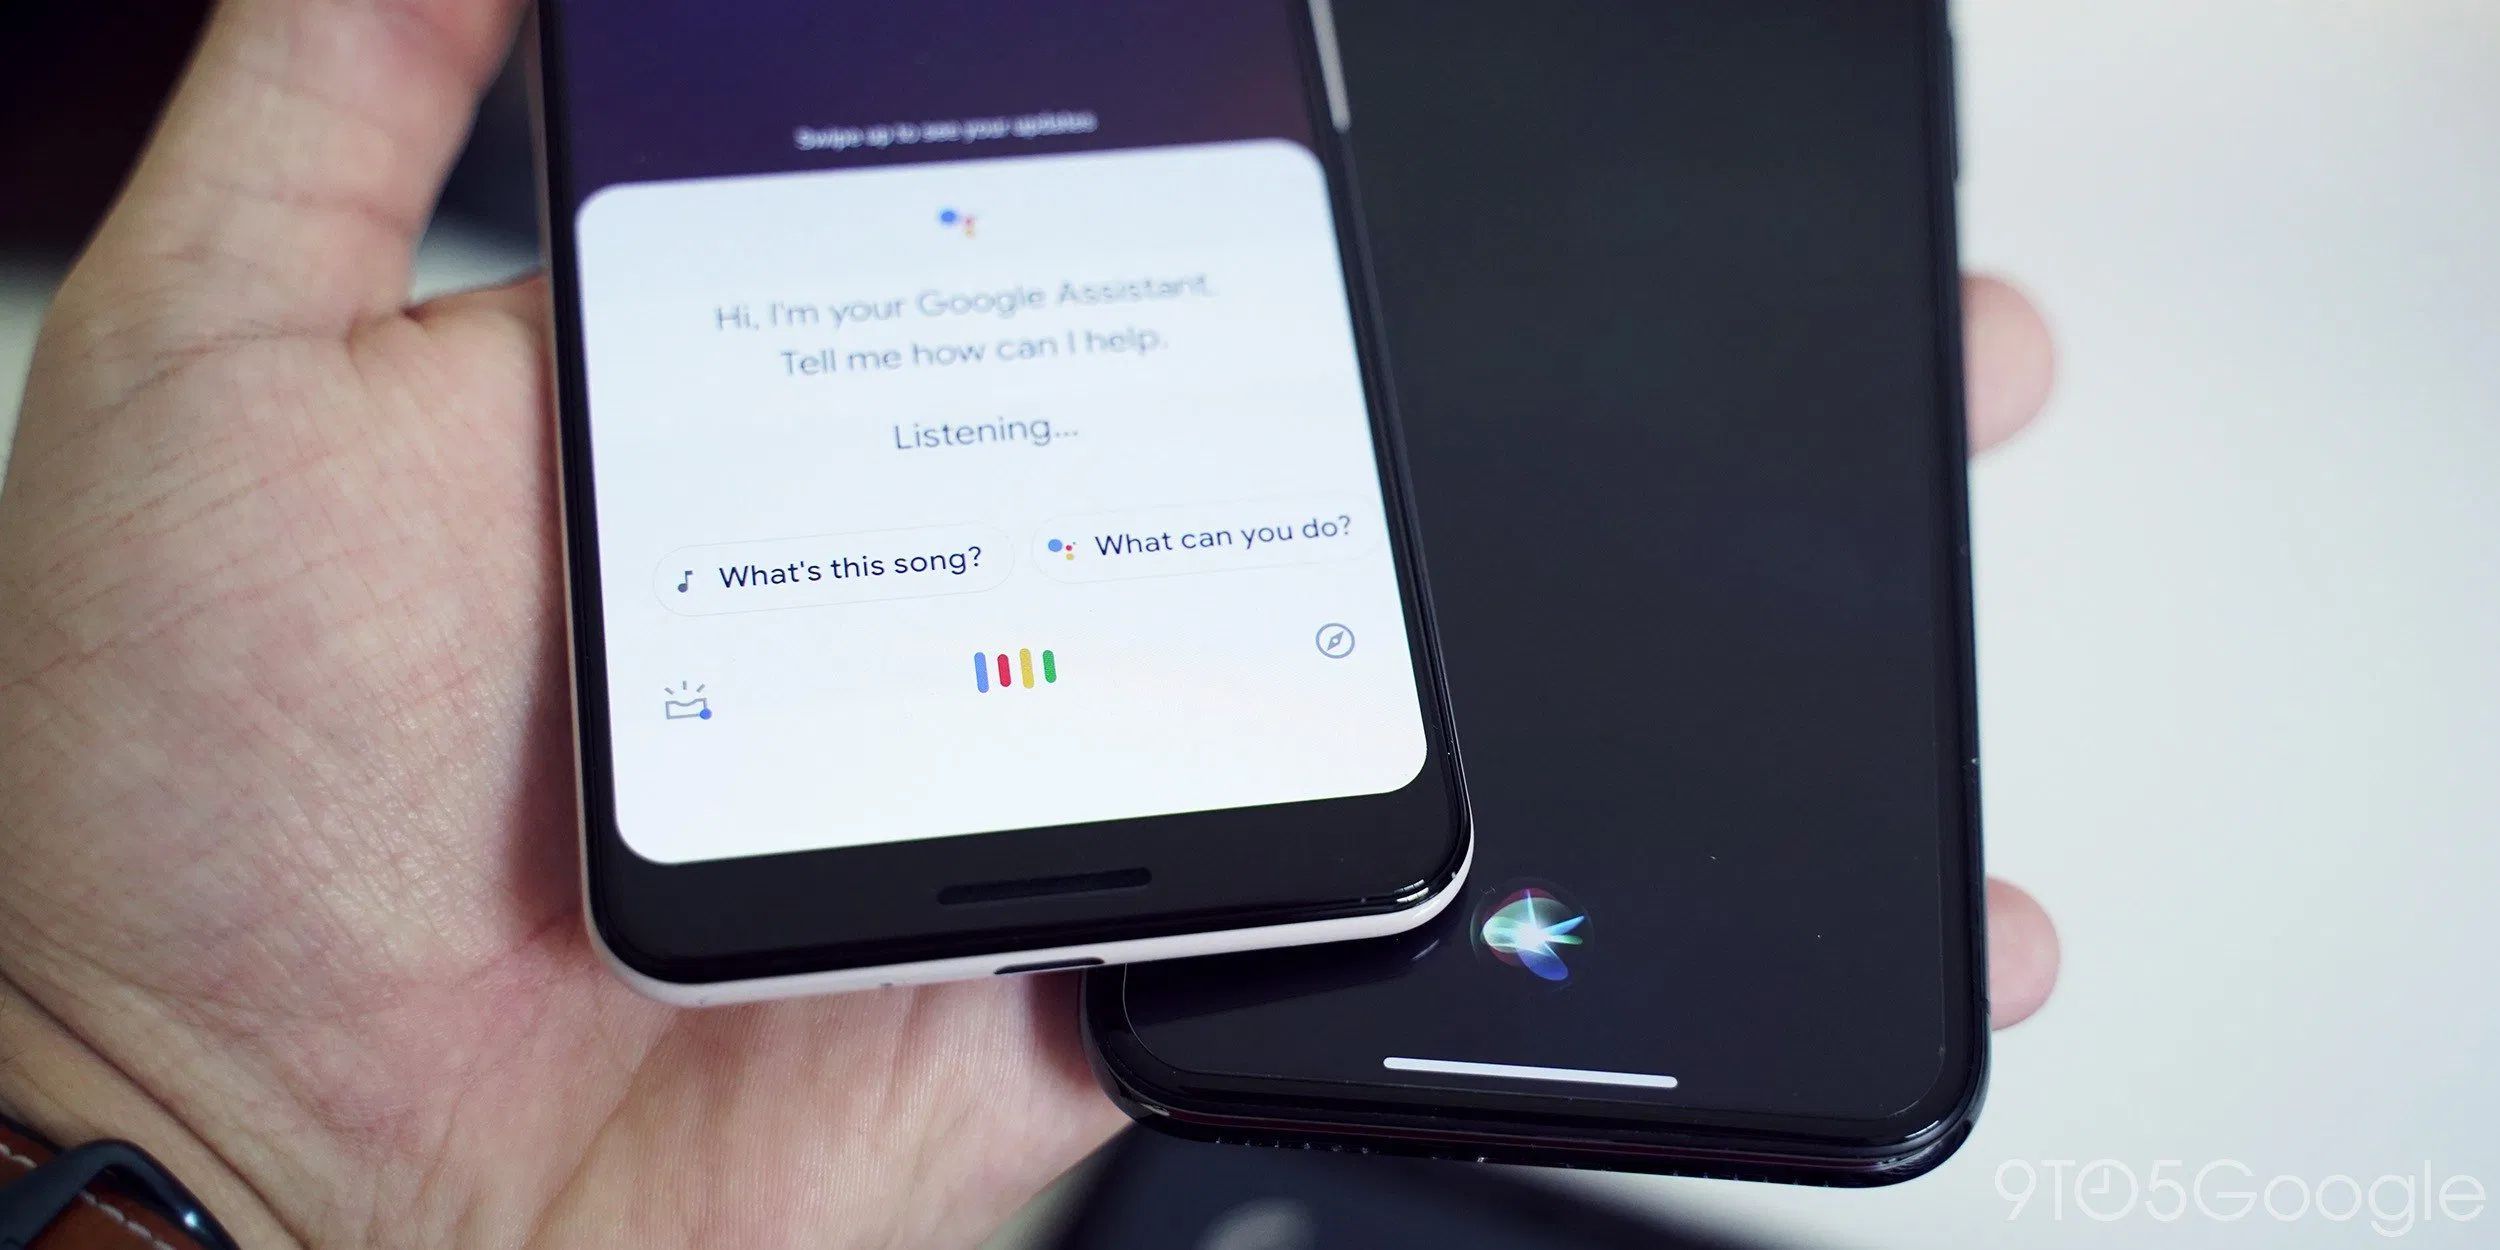 Google Voice now Works with Siri on iPhones, but still not Google Assistant